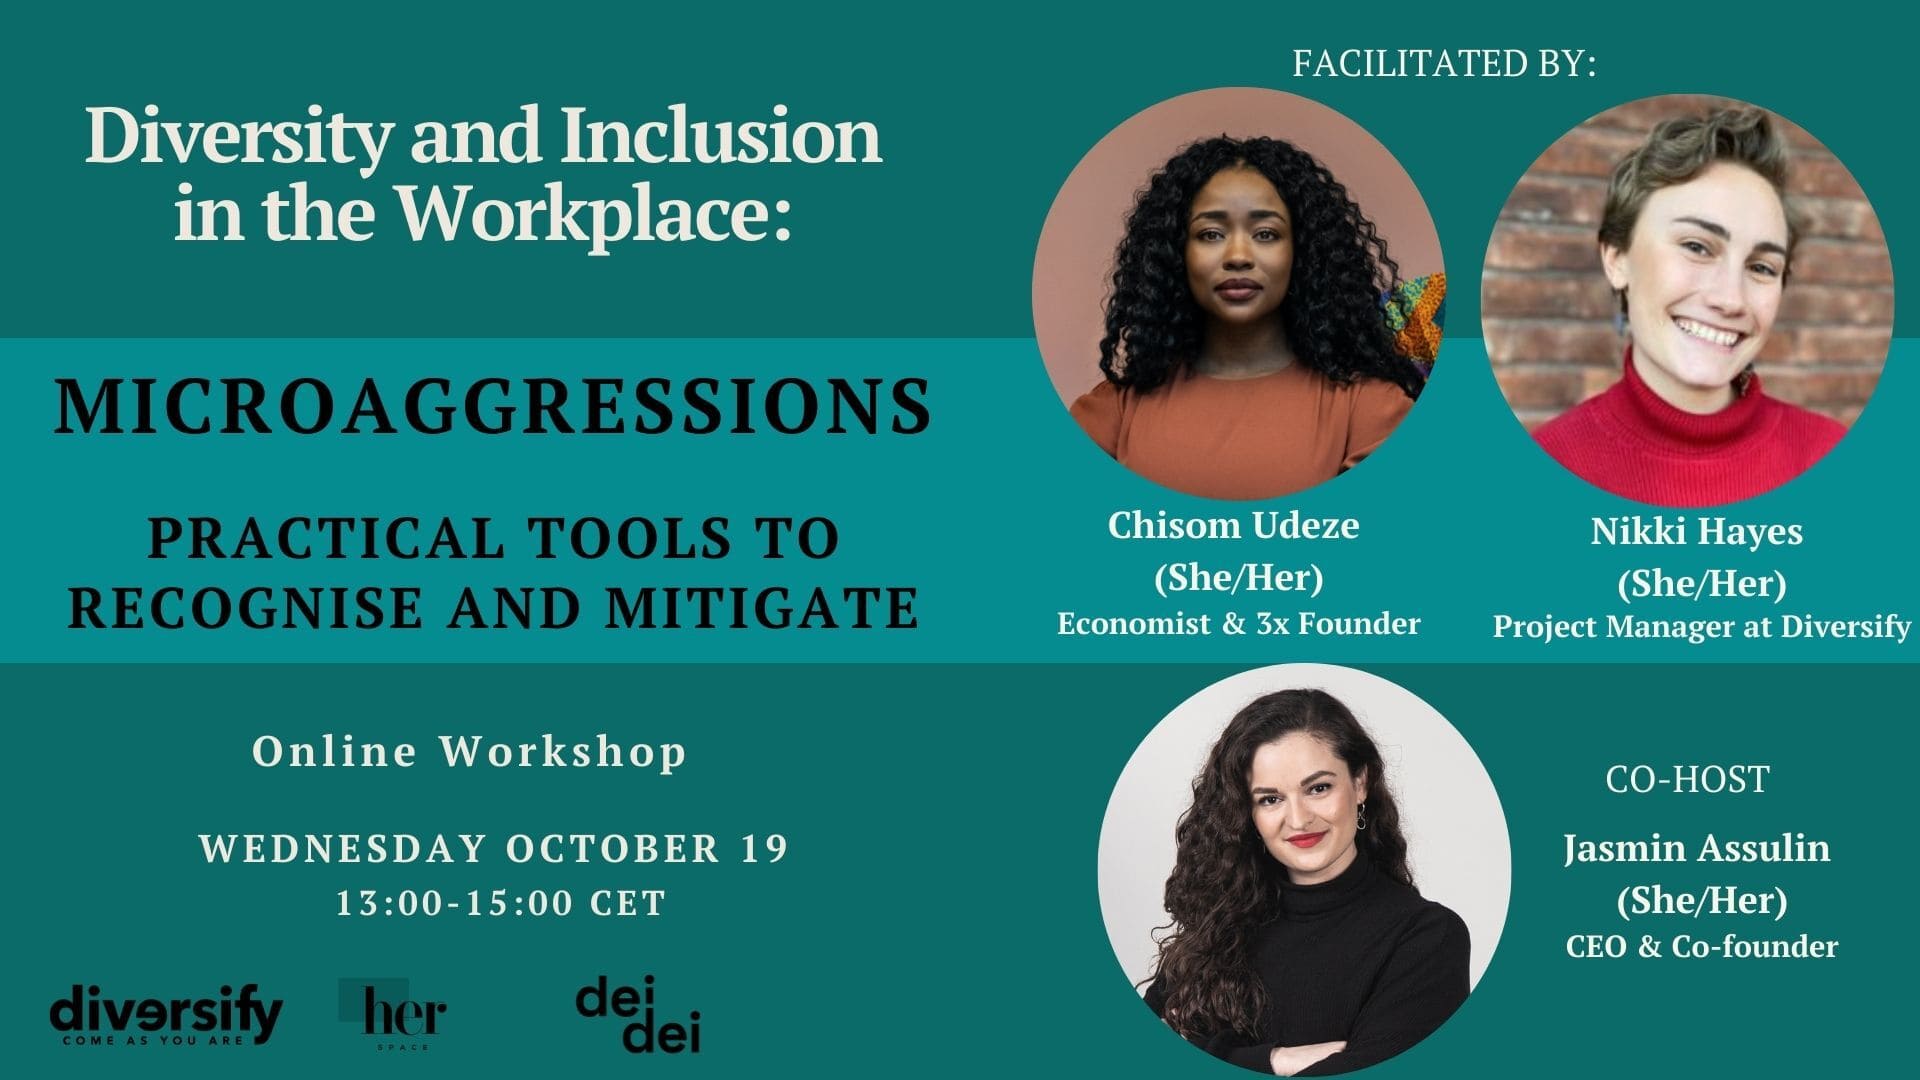 Diversity and Inclusion in the Workplace: Microaggression